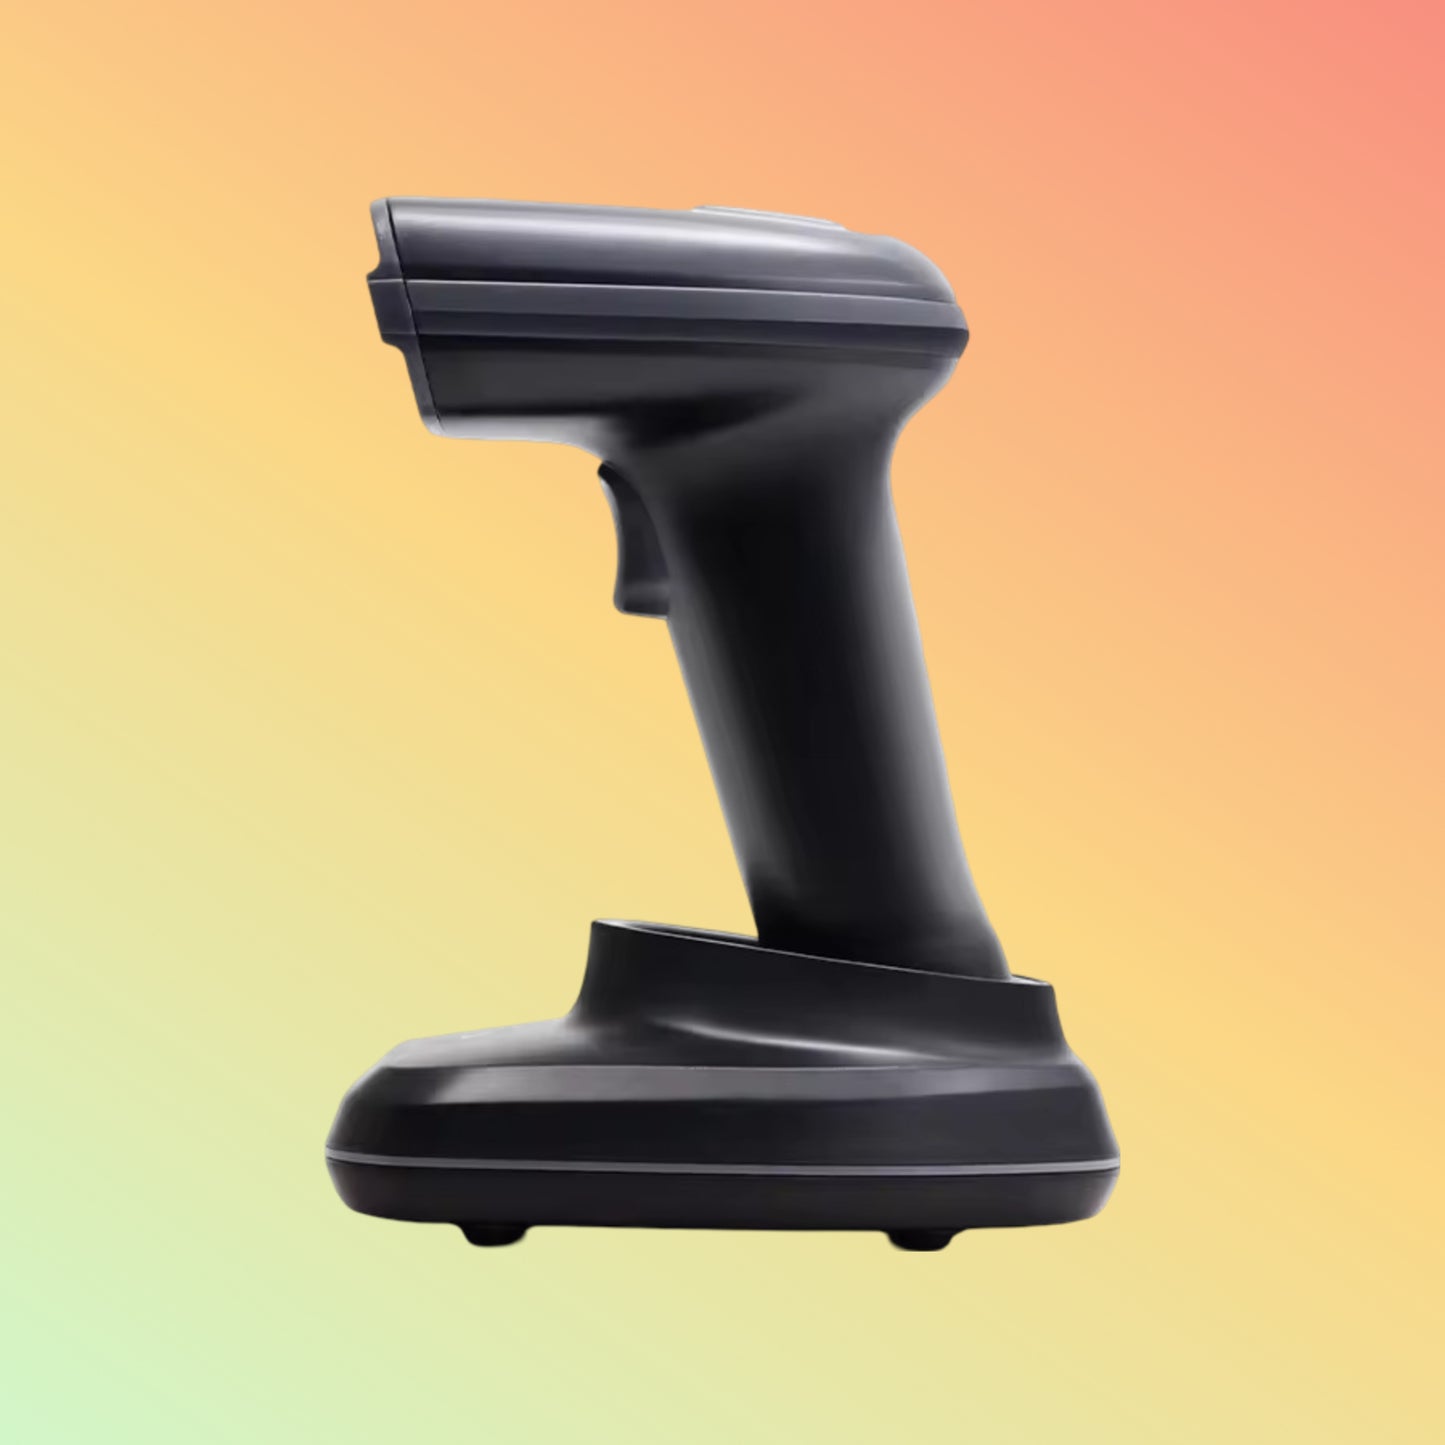 NEOPOS NP-R230 : 3-in-1 Bluetooth Barcode Scanner